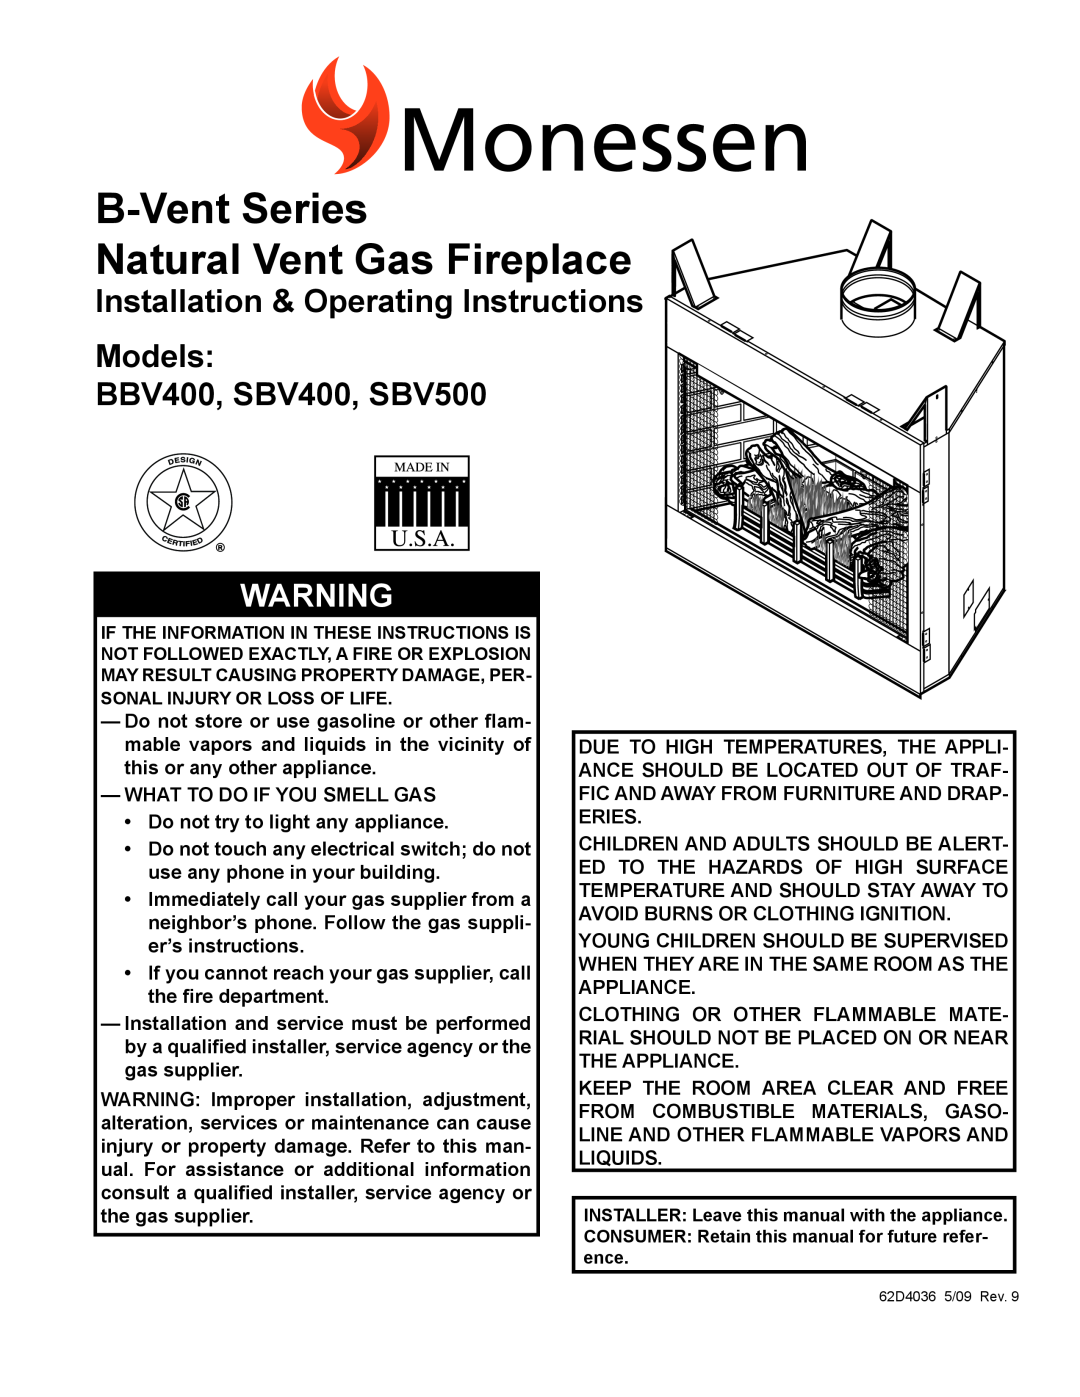 Monessen Hearth operating instructions B-VentSeries Natural Vent Gas Fireplace, Models BBV400, SBV400, SBV500 